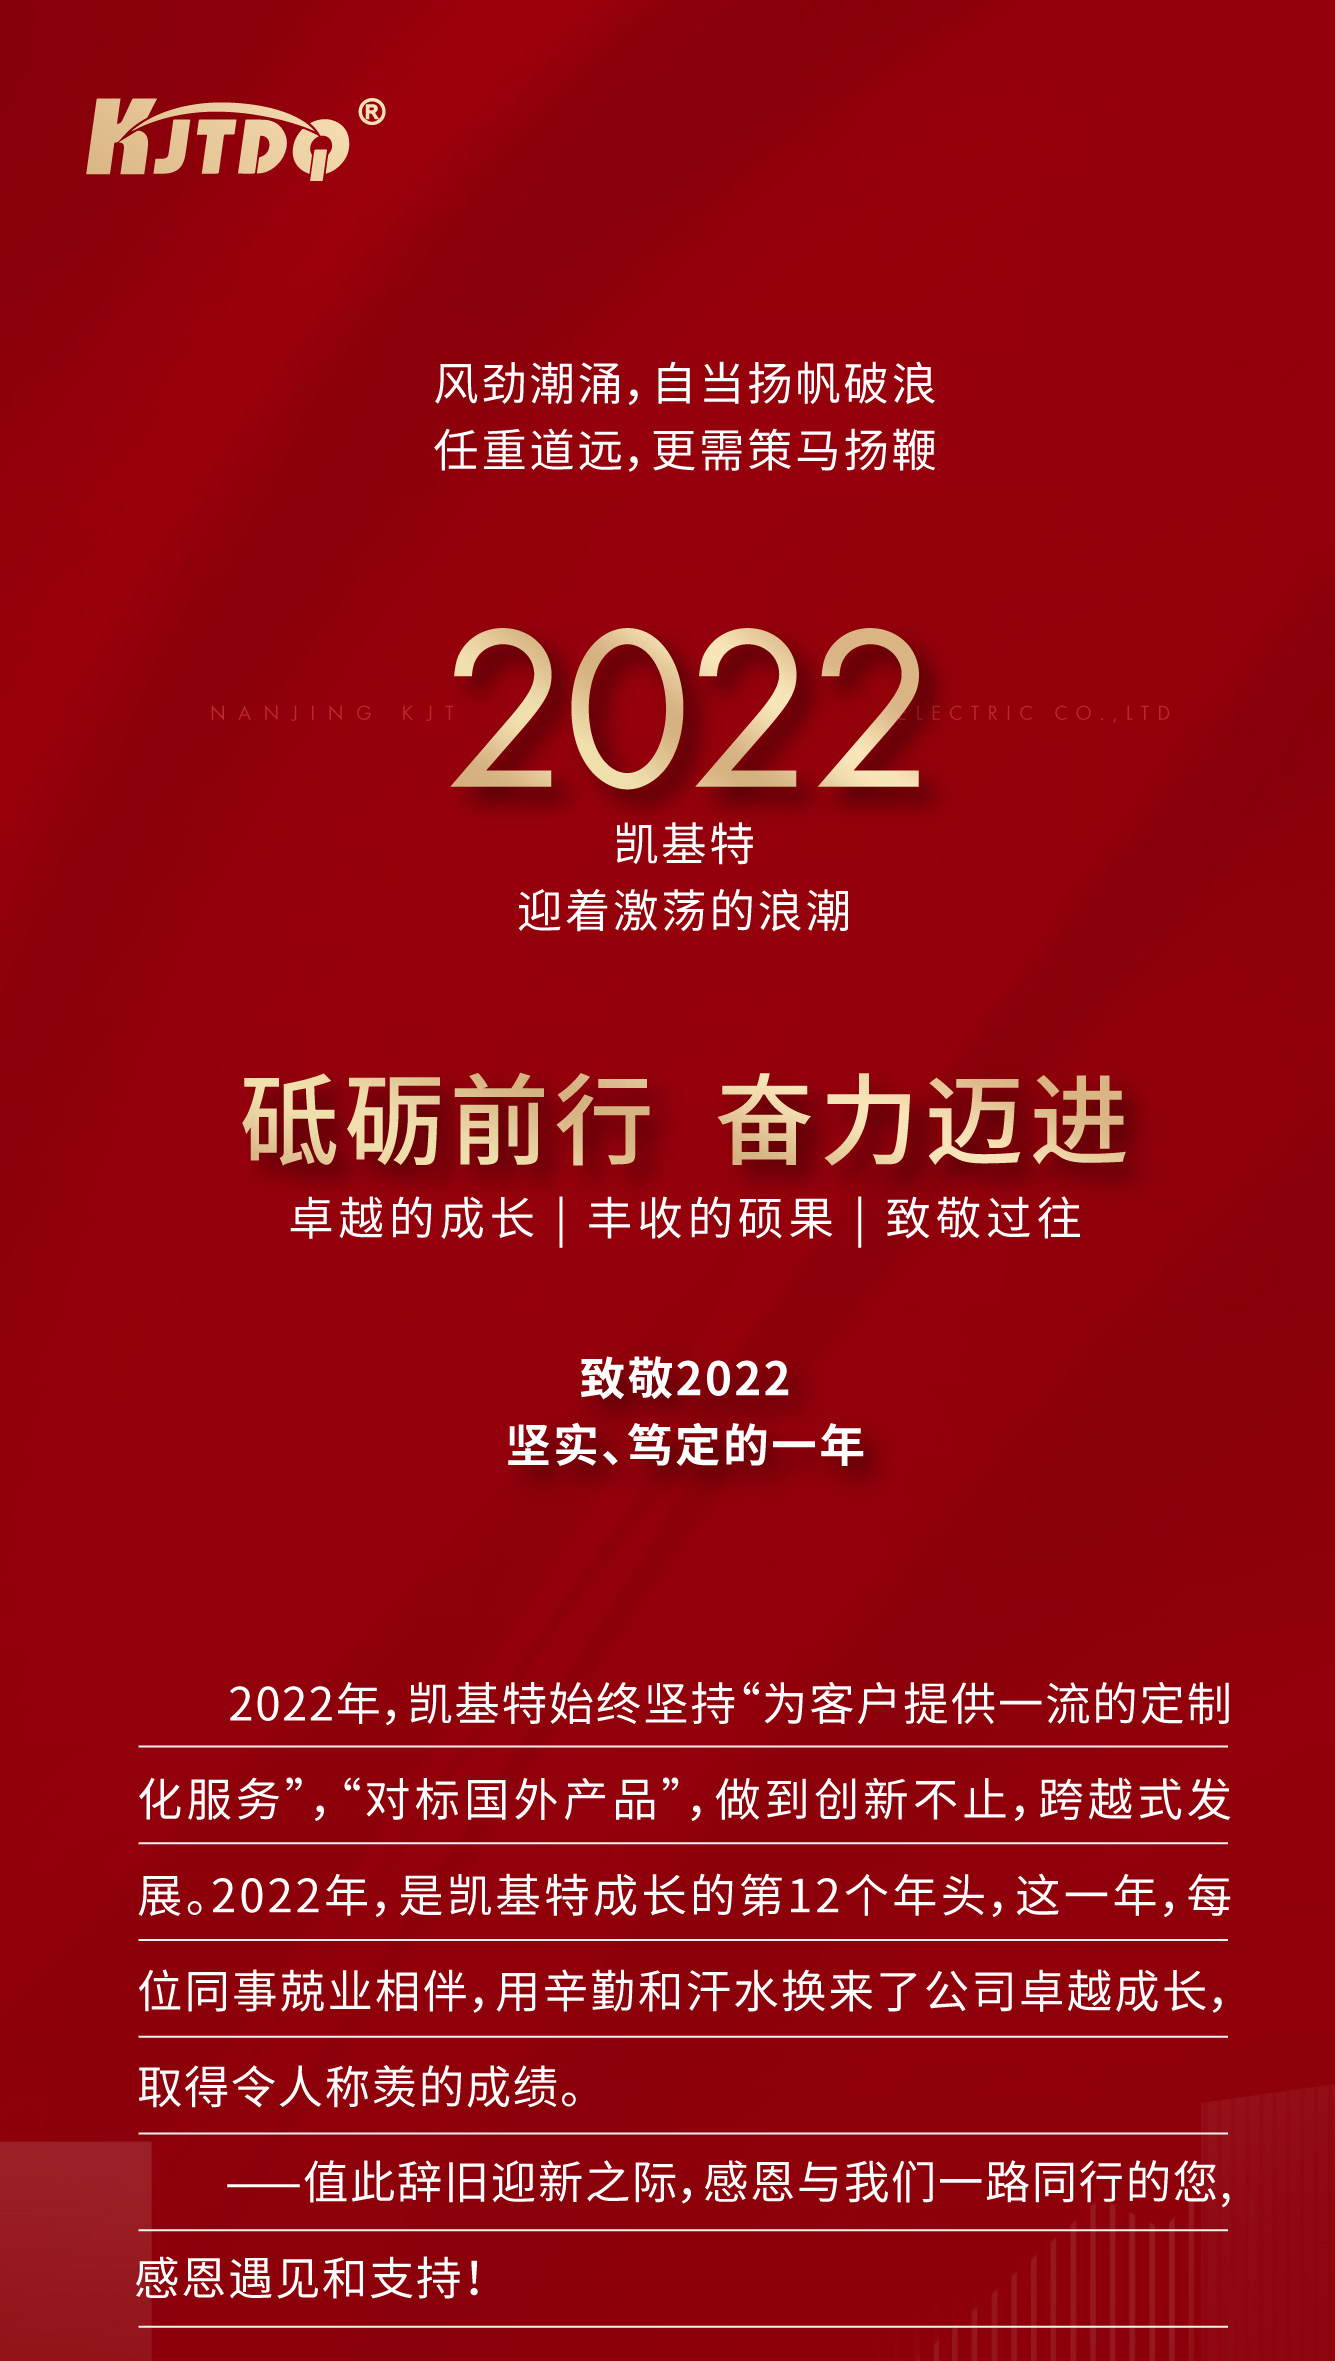 <strong>乘風攬月，再創新高—凱基特2022年度回顧</strong>